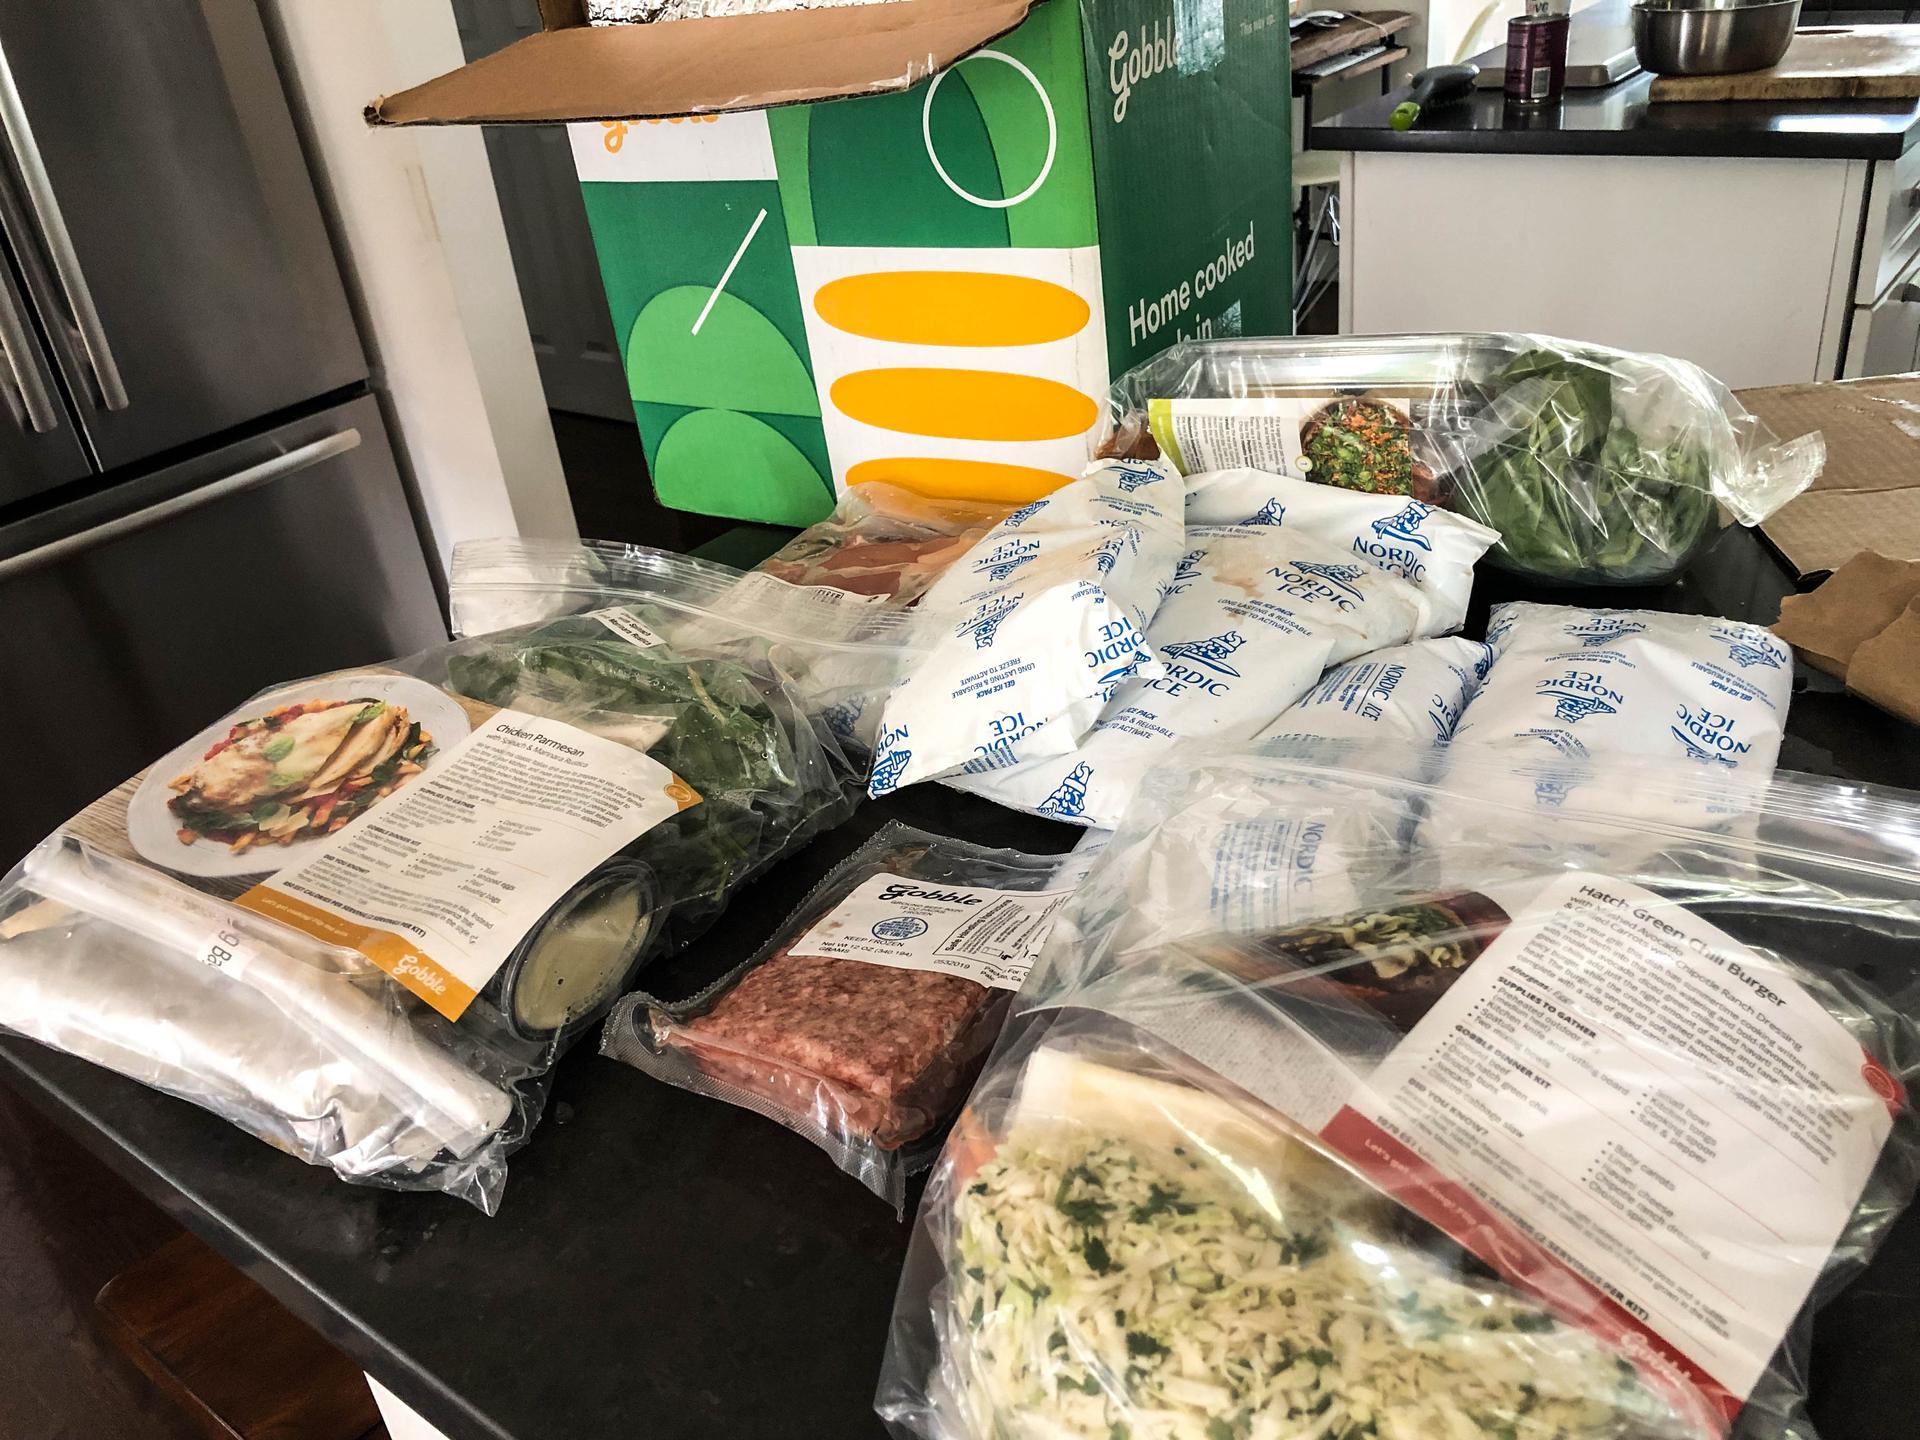 A meal kit is unboxed on a counter space. Food is wrapped in plastic packaging.